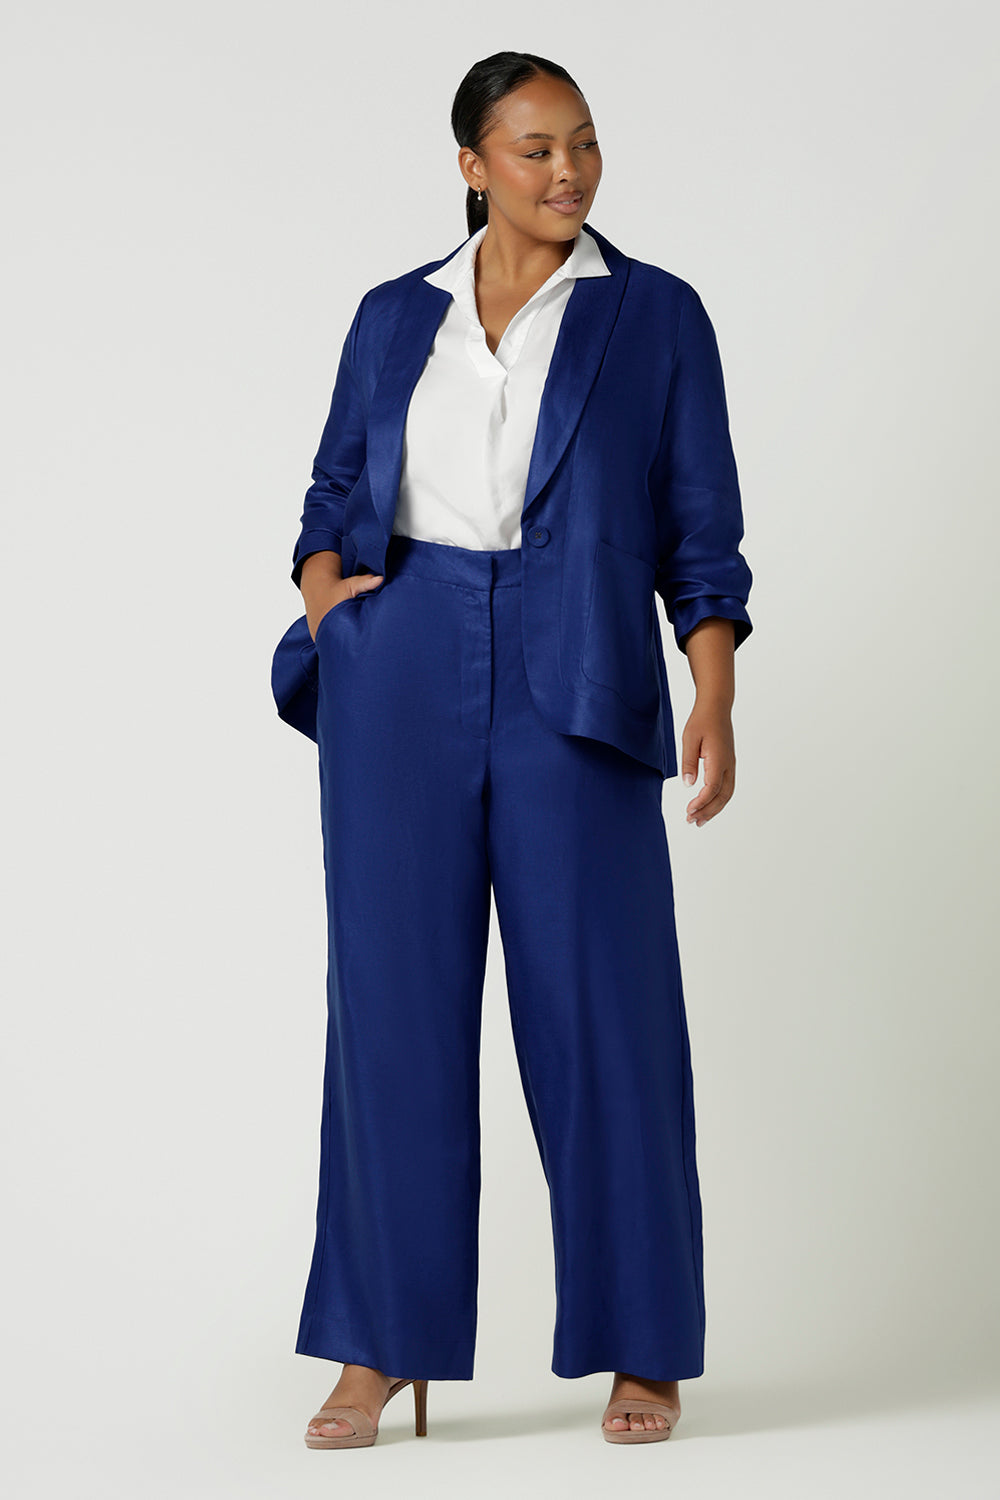 A size 12 woman wears the Ronnie Pant in Cobalt Linen. A high waist soft tailored pant with a fly front and belt loops. Styled back with the Houston Blazer in cobalt linen. Made in Australia for women size 8 - 24.